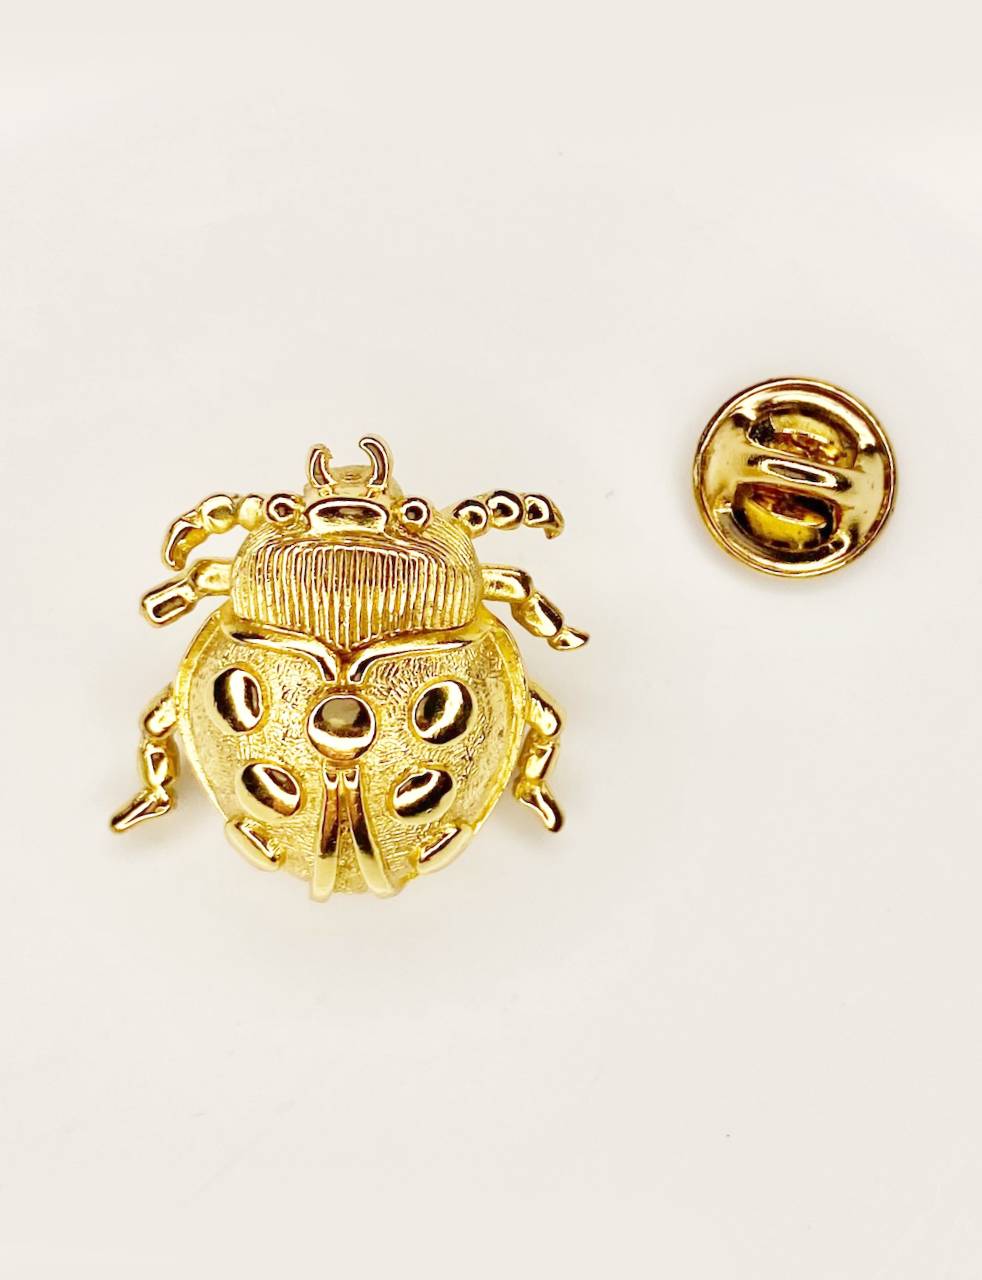 1980s Christian Dior Ladybird Gold Plated Vintage Pin Brooch - style - CHNGR